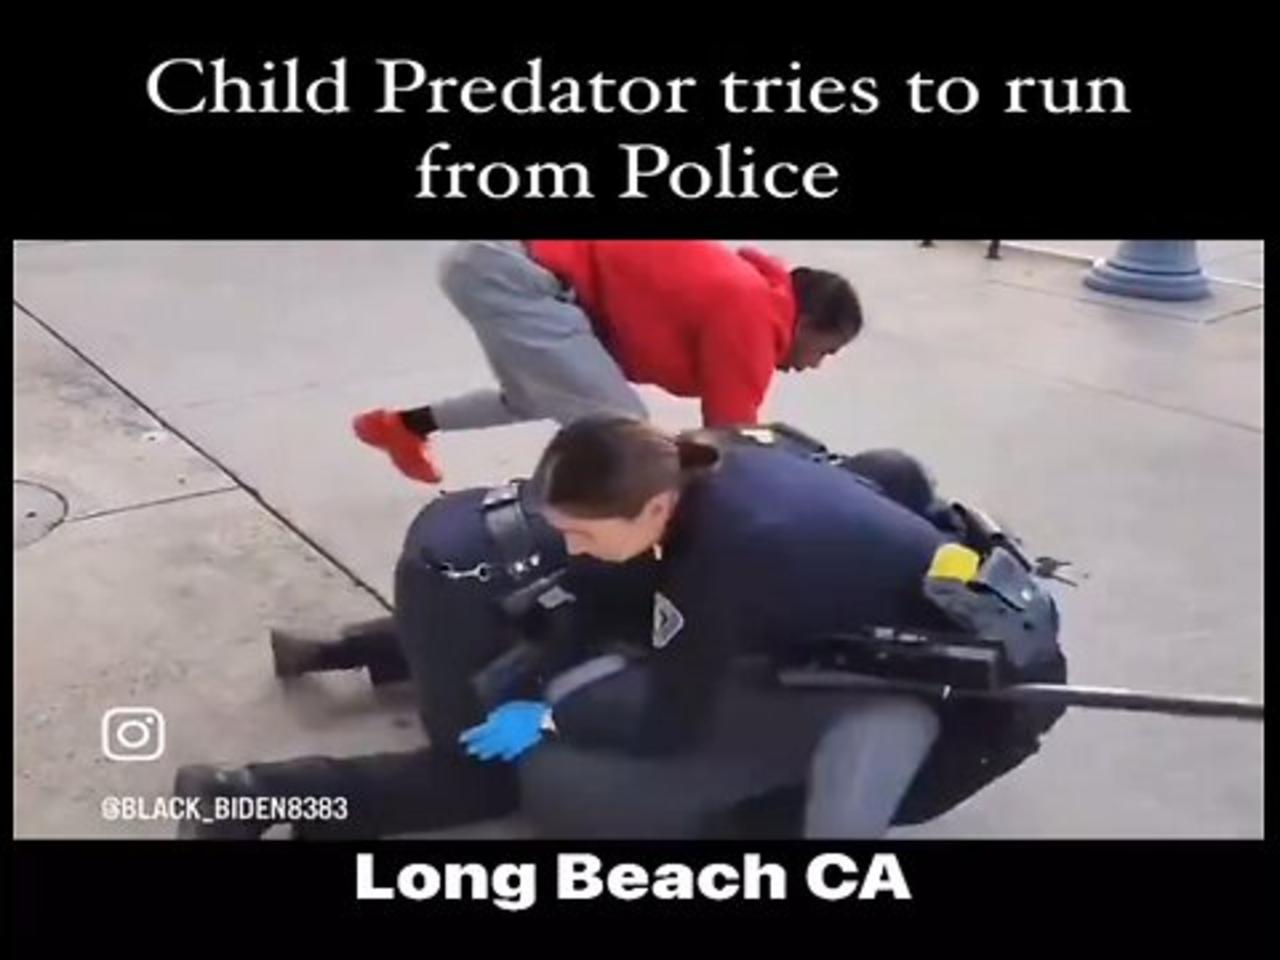 Child predator tries to escape from police in Long Beach Ca